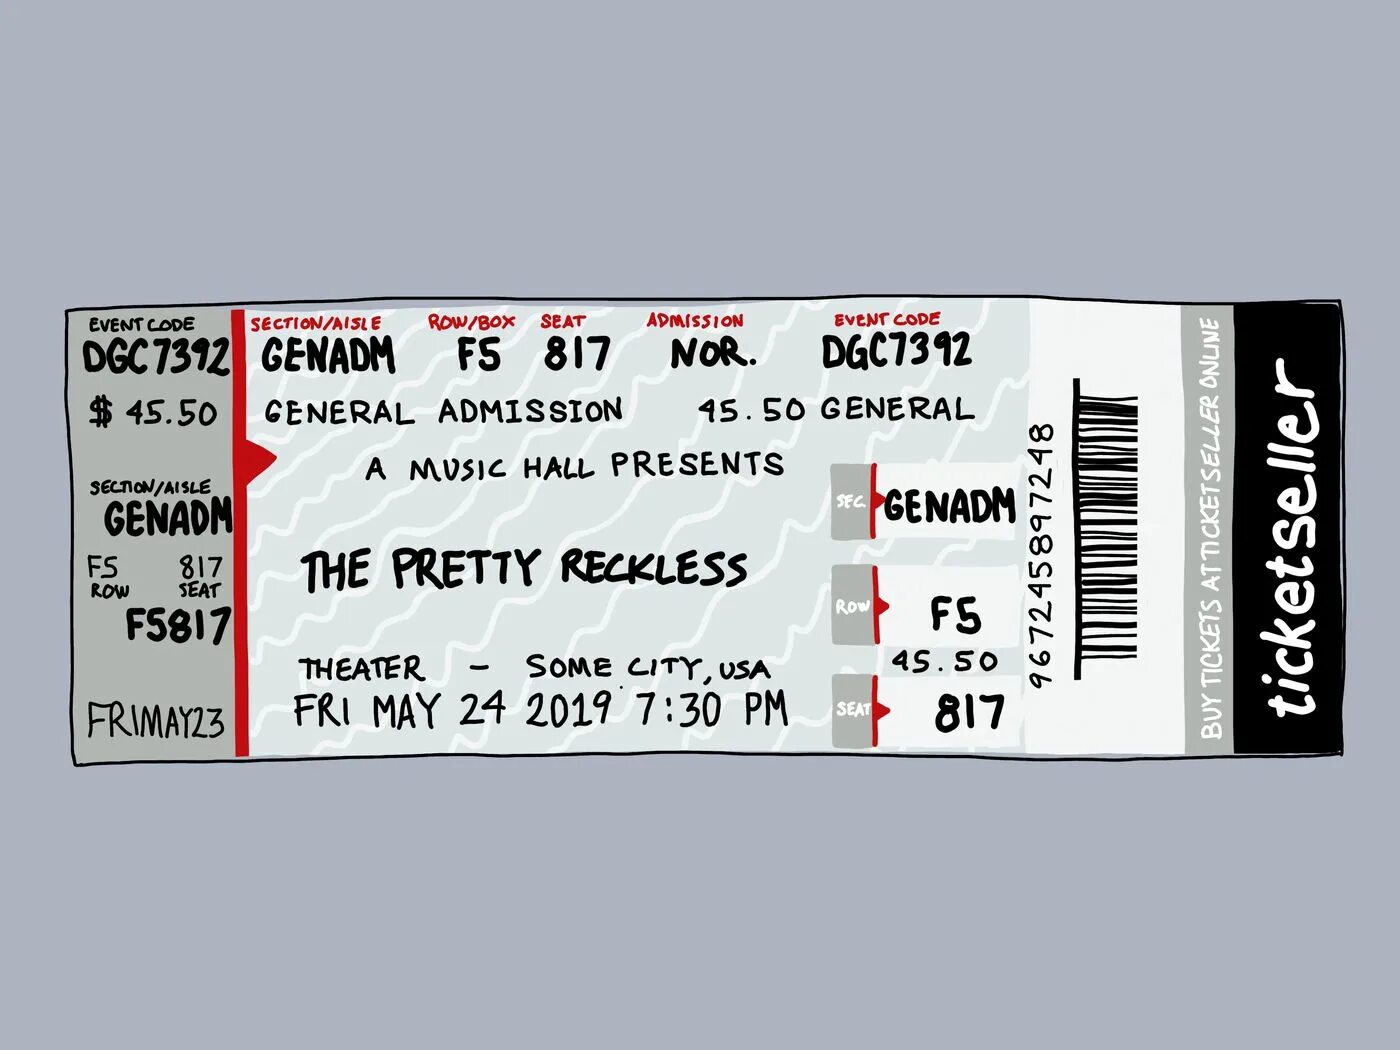 Ticket. Concert ticket. Ticket to. Tickets for the Concert. Buy tickets theater